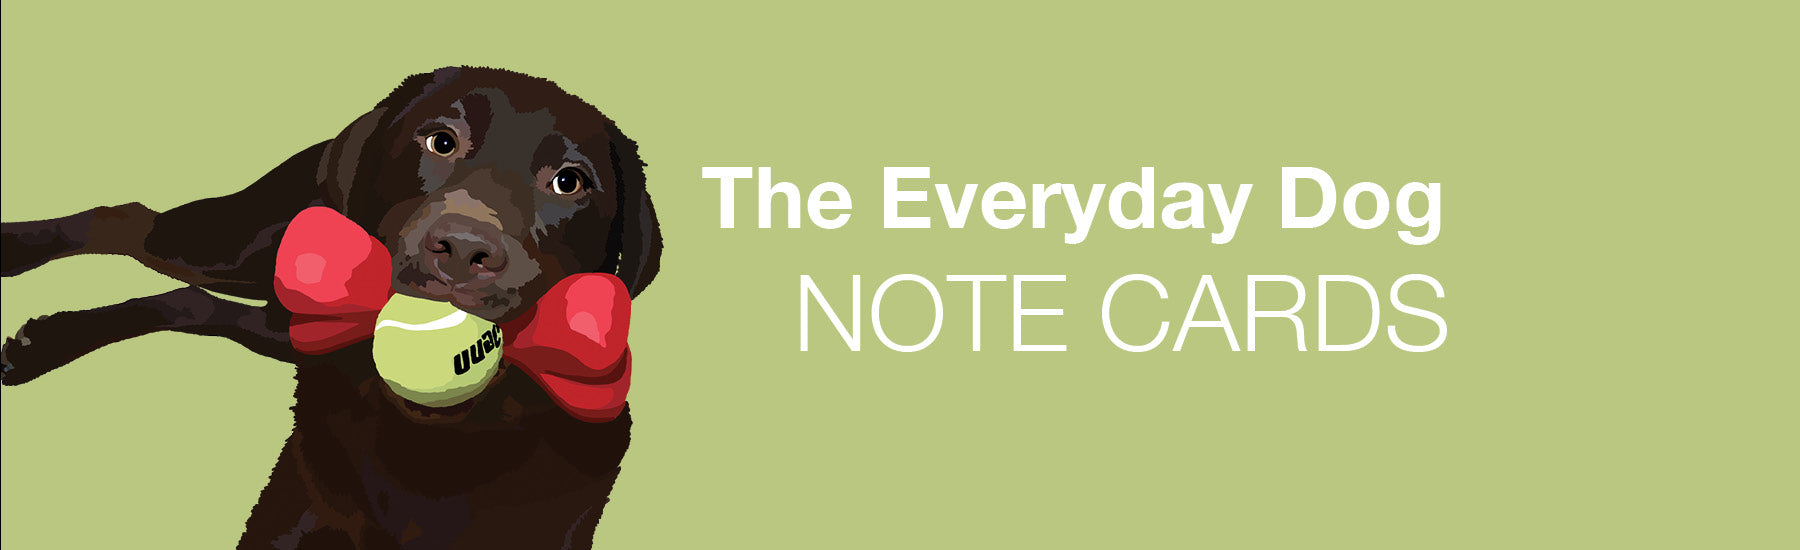 EVERYDAY DOG NOTE CARDS